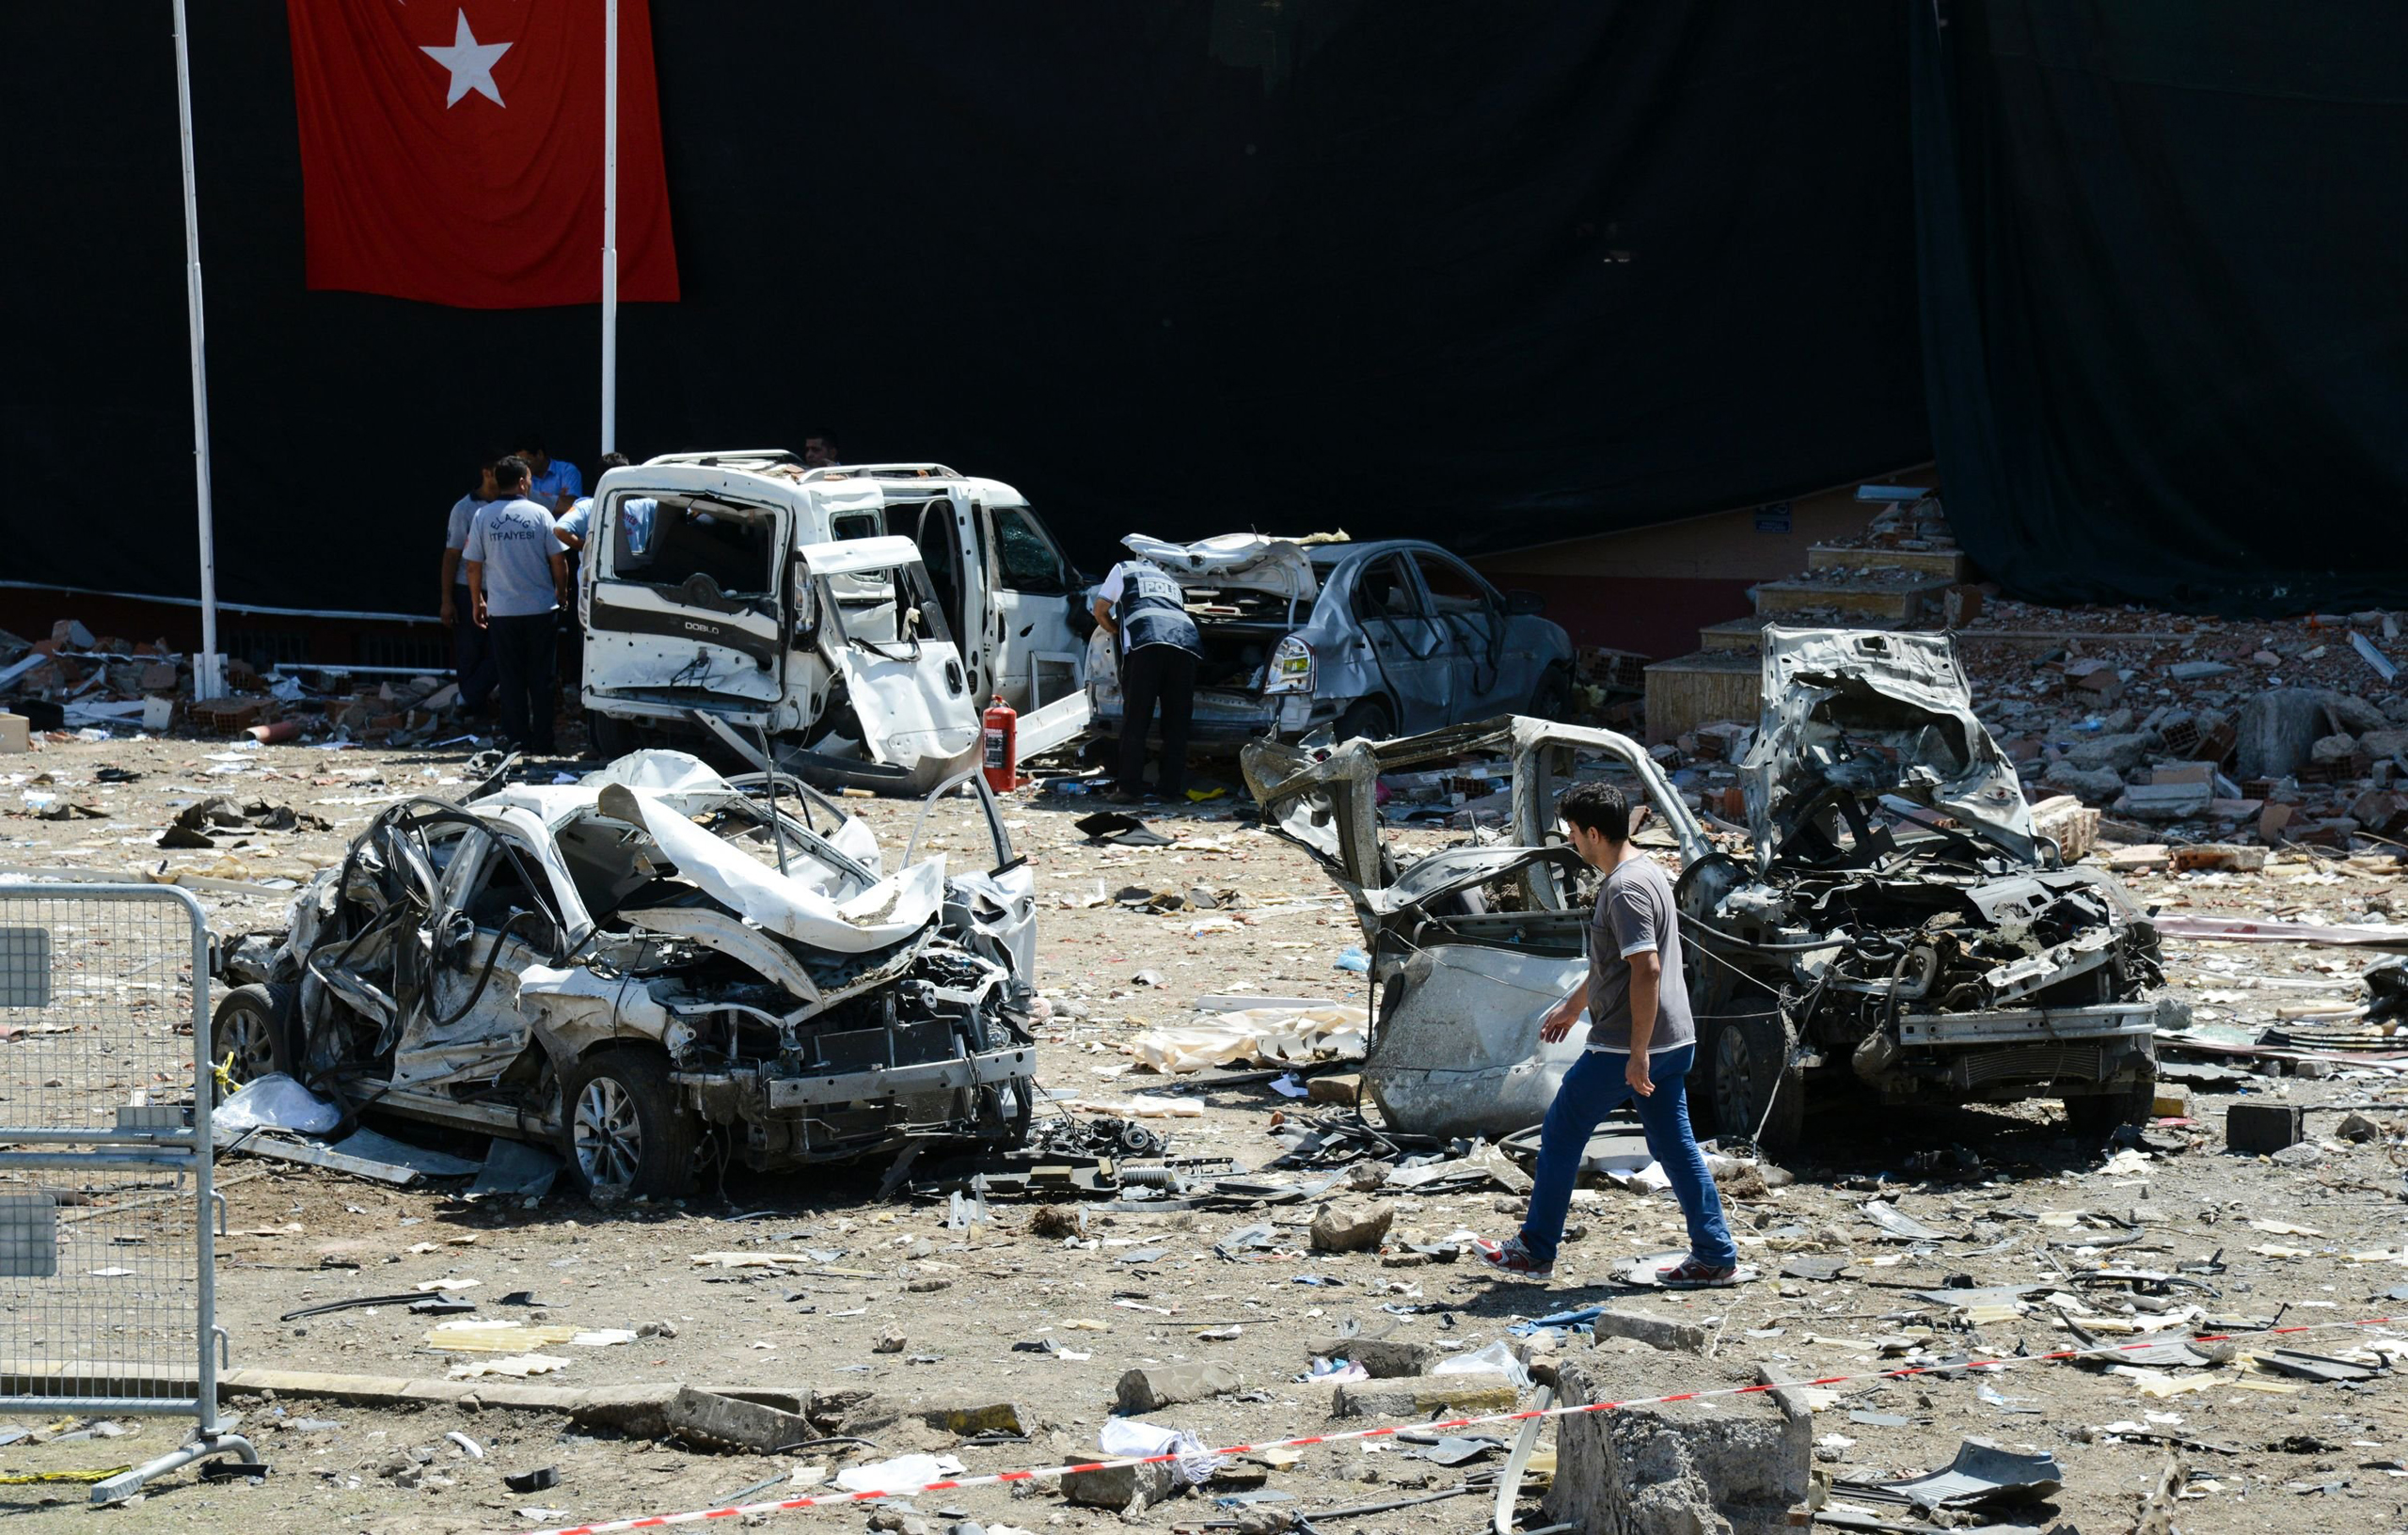 Turkish rescue workers stand by the wreckage of a vehicle as a Turkish police officer  inspects a destroyed car and a man walks among the remains at the blast scene following a car bomb attack on a police station in the eastern Turkish city of Elazig, on Aug. 18, 2016. (Ilyas Akengin—AFP/Getty Images)